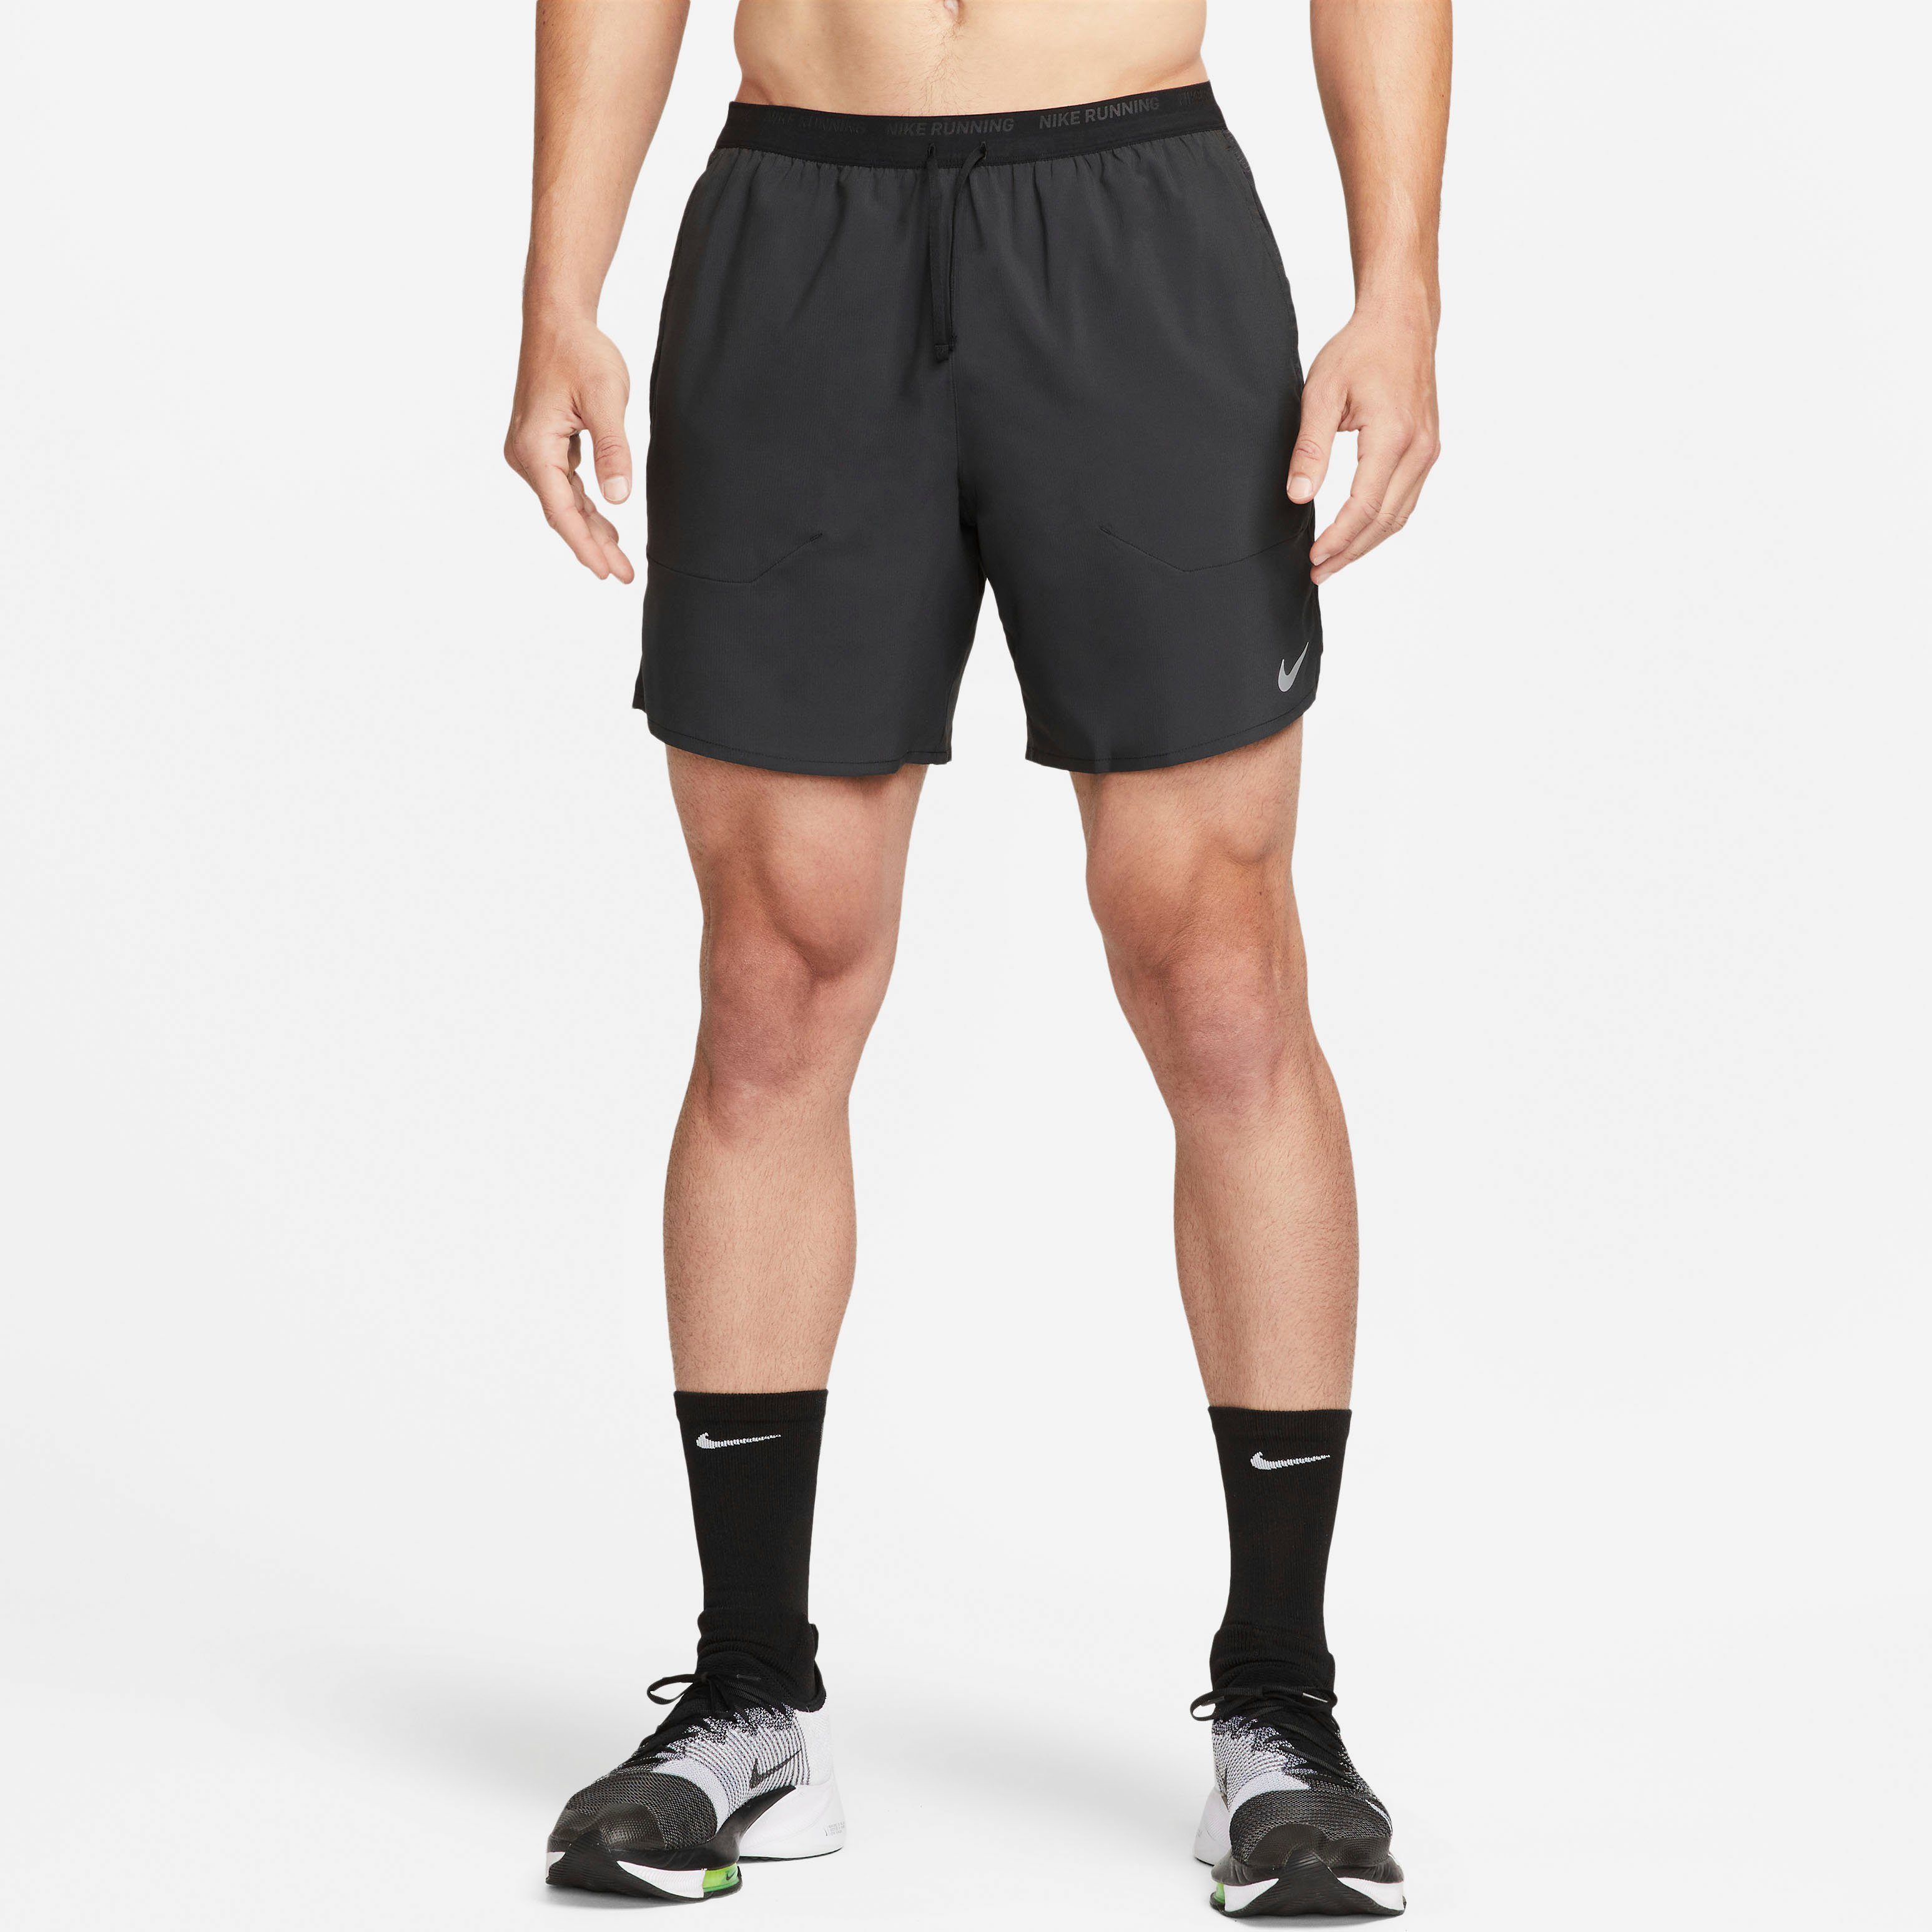 Laufshorts Brief-Lined Nike Running Men's " Dri-FIT Stride Shorts